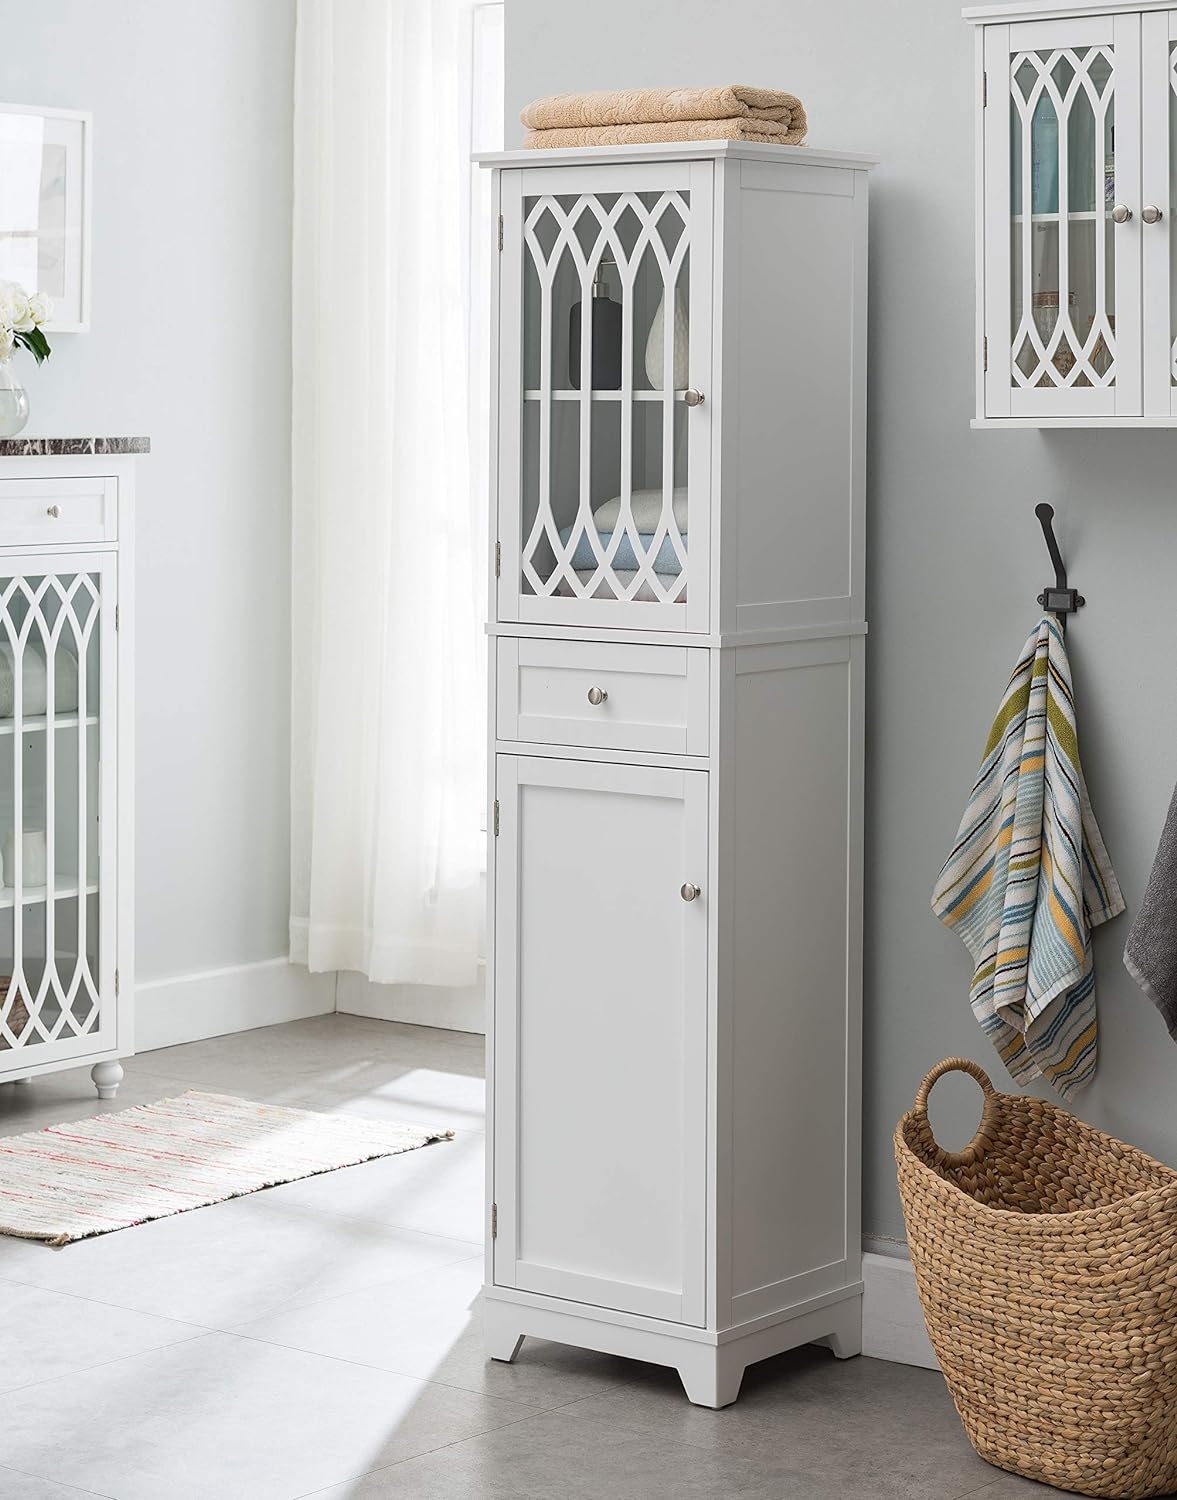 This cabinet is perfect for storage in my bathroom. It its exactly what I was looking for!